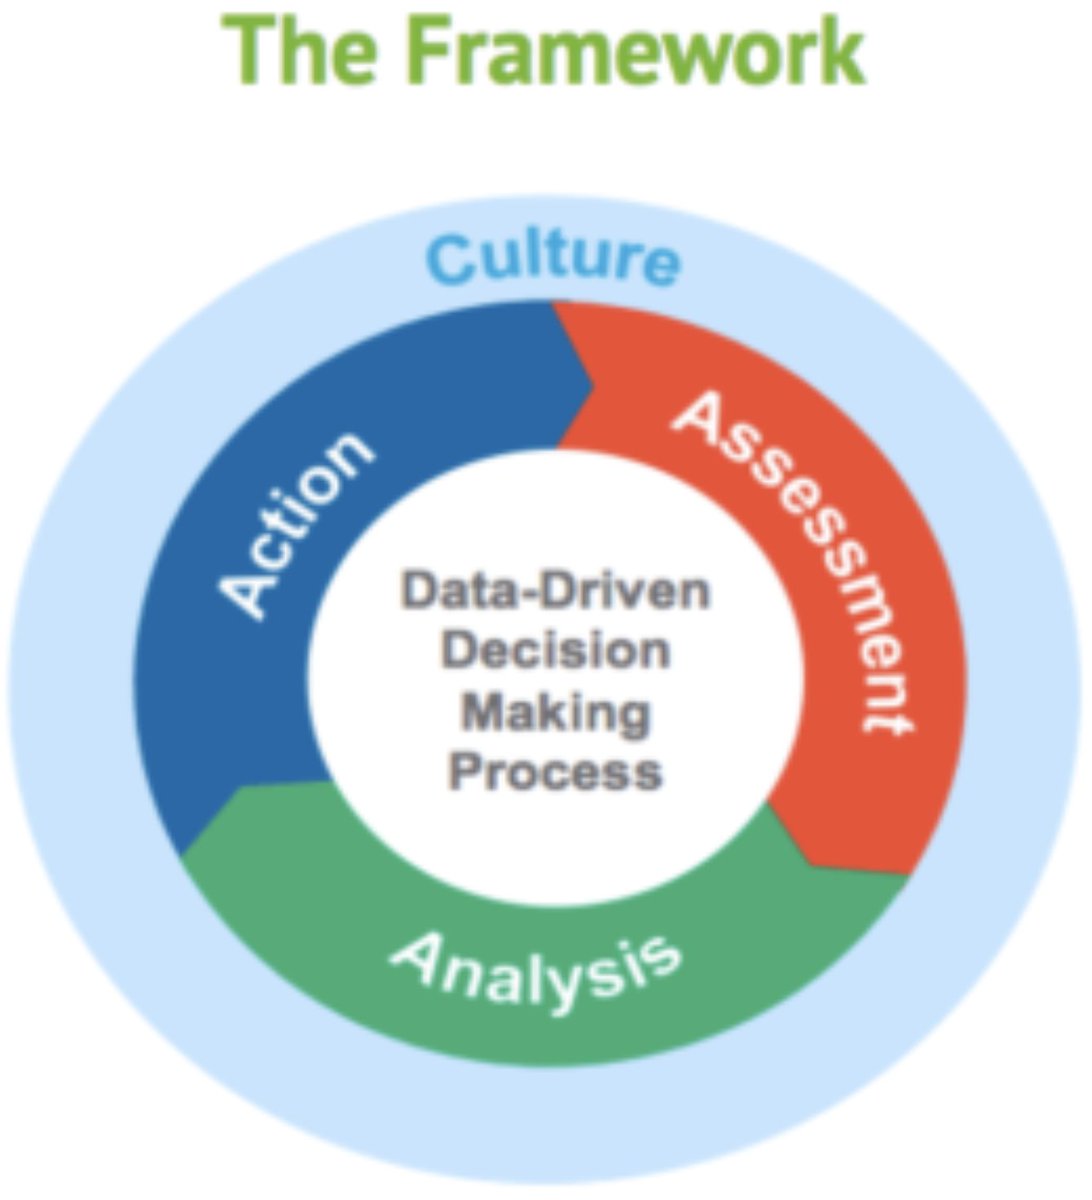 I had the fortune of helping to implement a math program on the district level back in 2002-2005 and we used a simple data framework similar to the one below Some people say'What about what data doesn't show?' Truth is, data will tell you the complete story. #LeadershipMatters